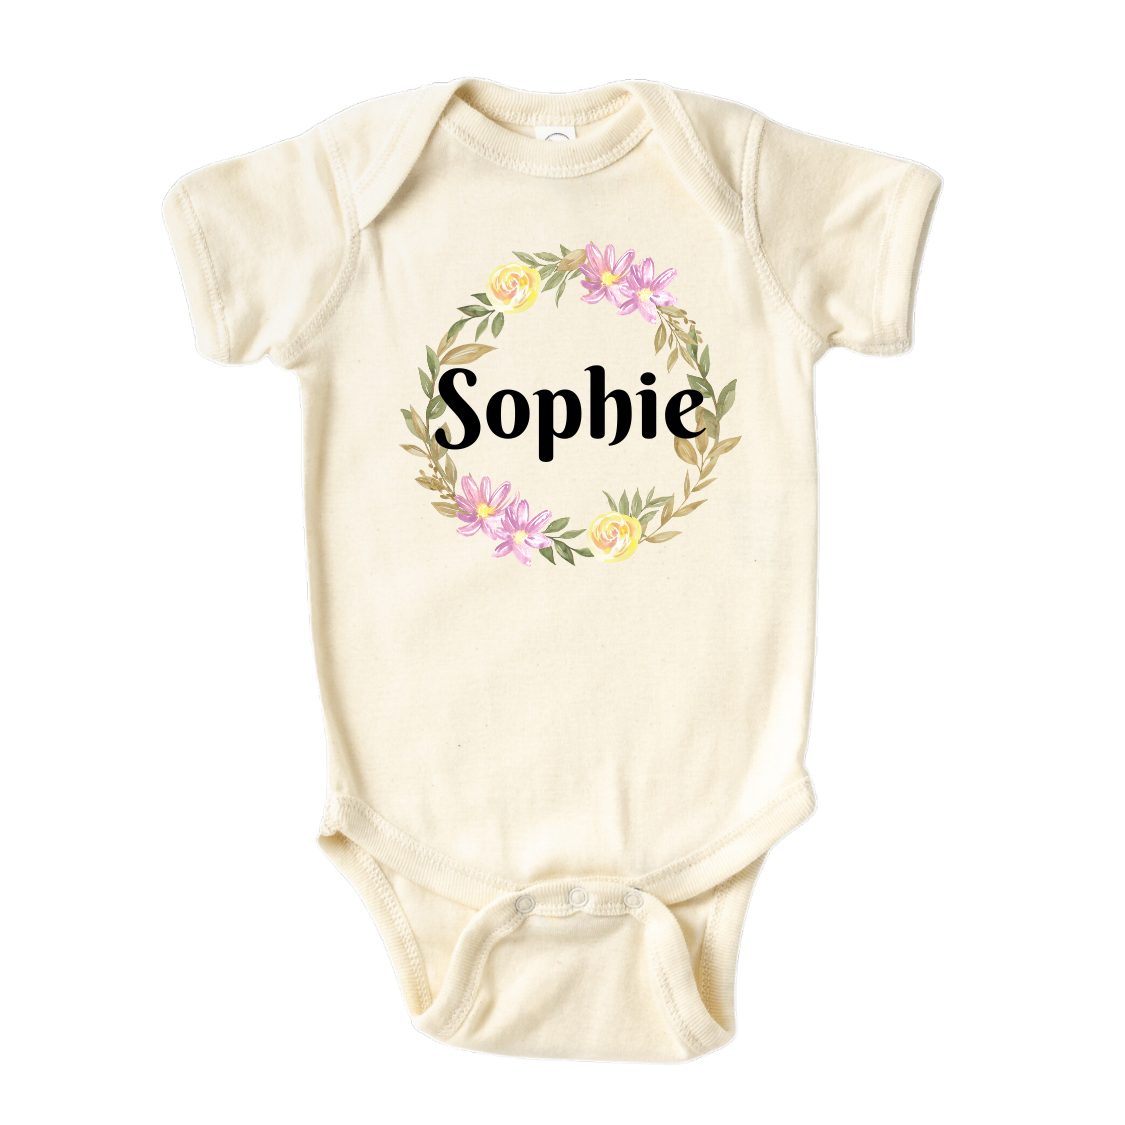 Kid's t-shirt with a cute flower wreath design, customizable with names.